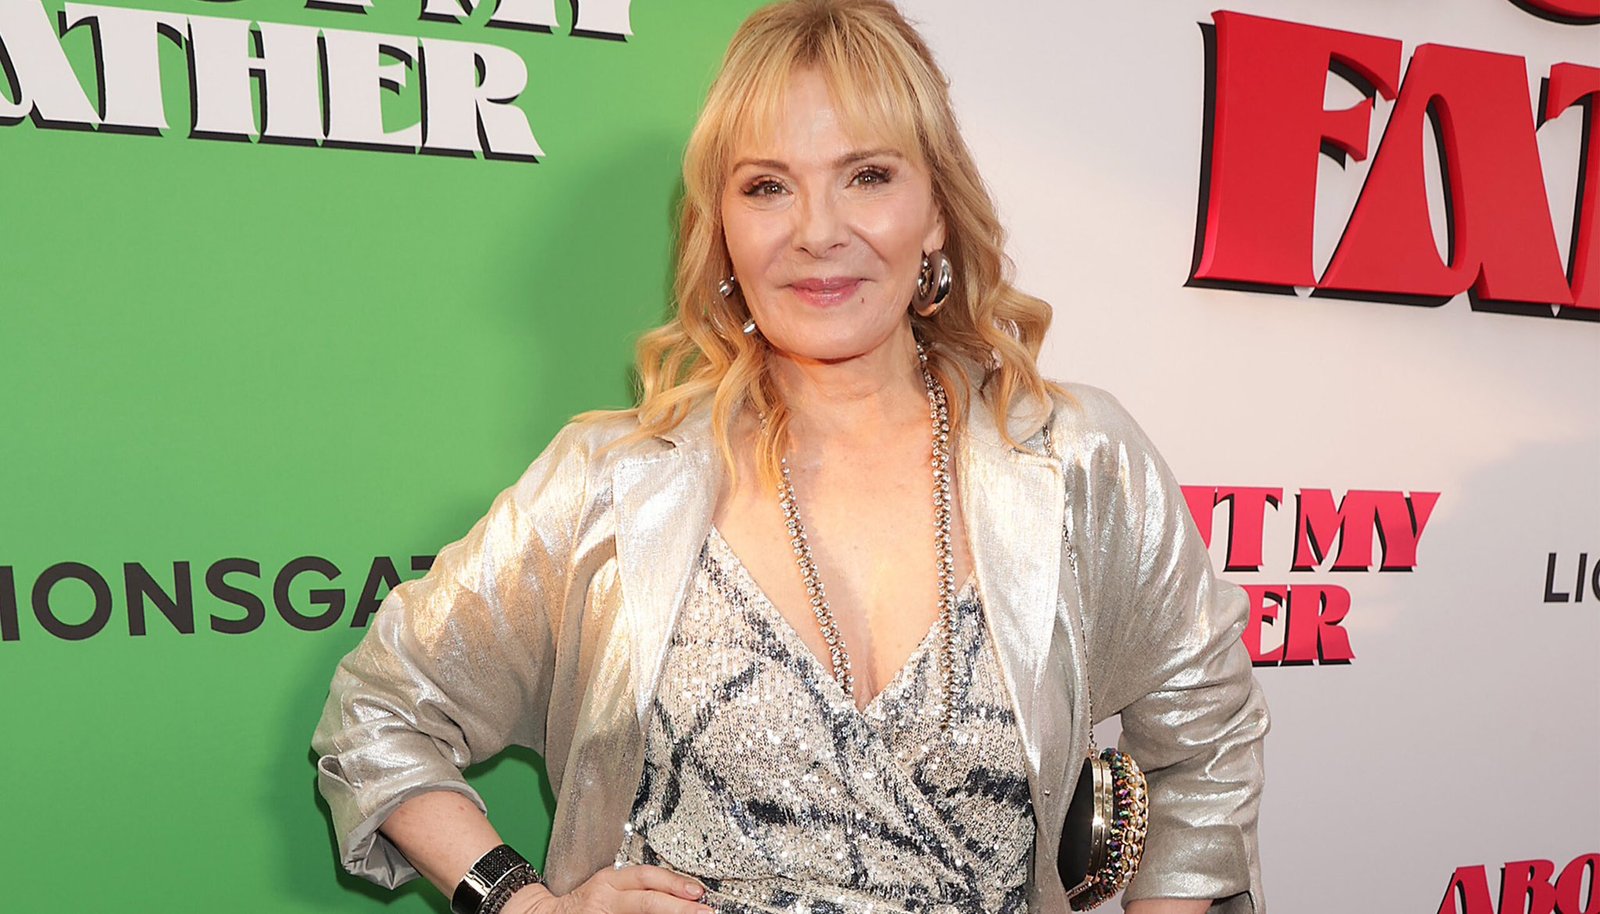 Fans Rejoice As Kim Cattrall Returns As Samantha Jones In “S*x and the City” Spinoff